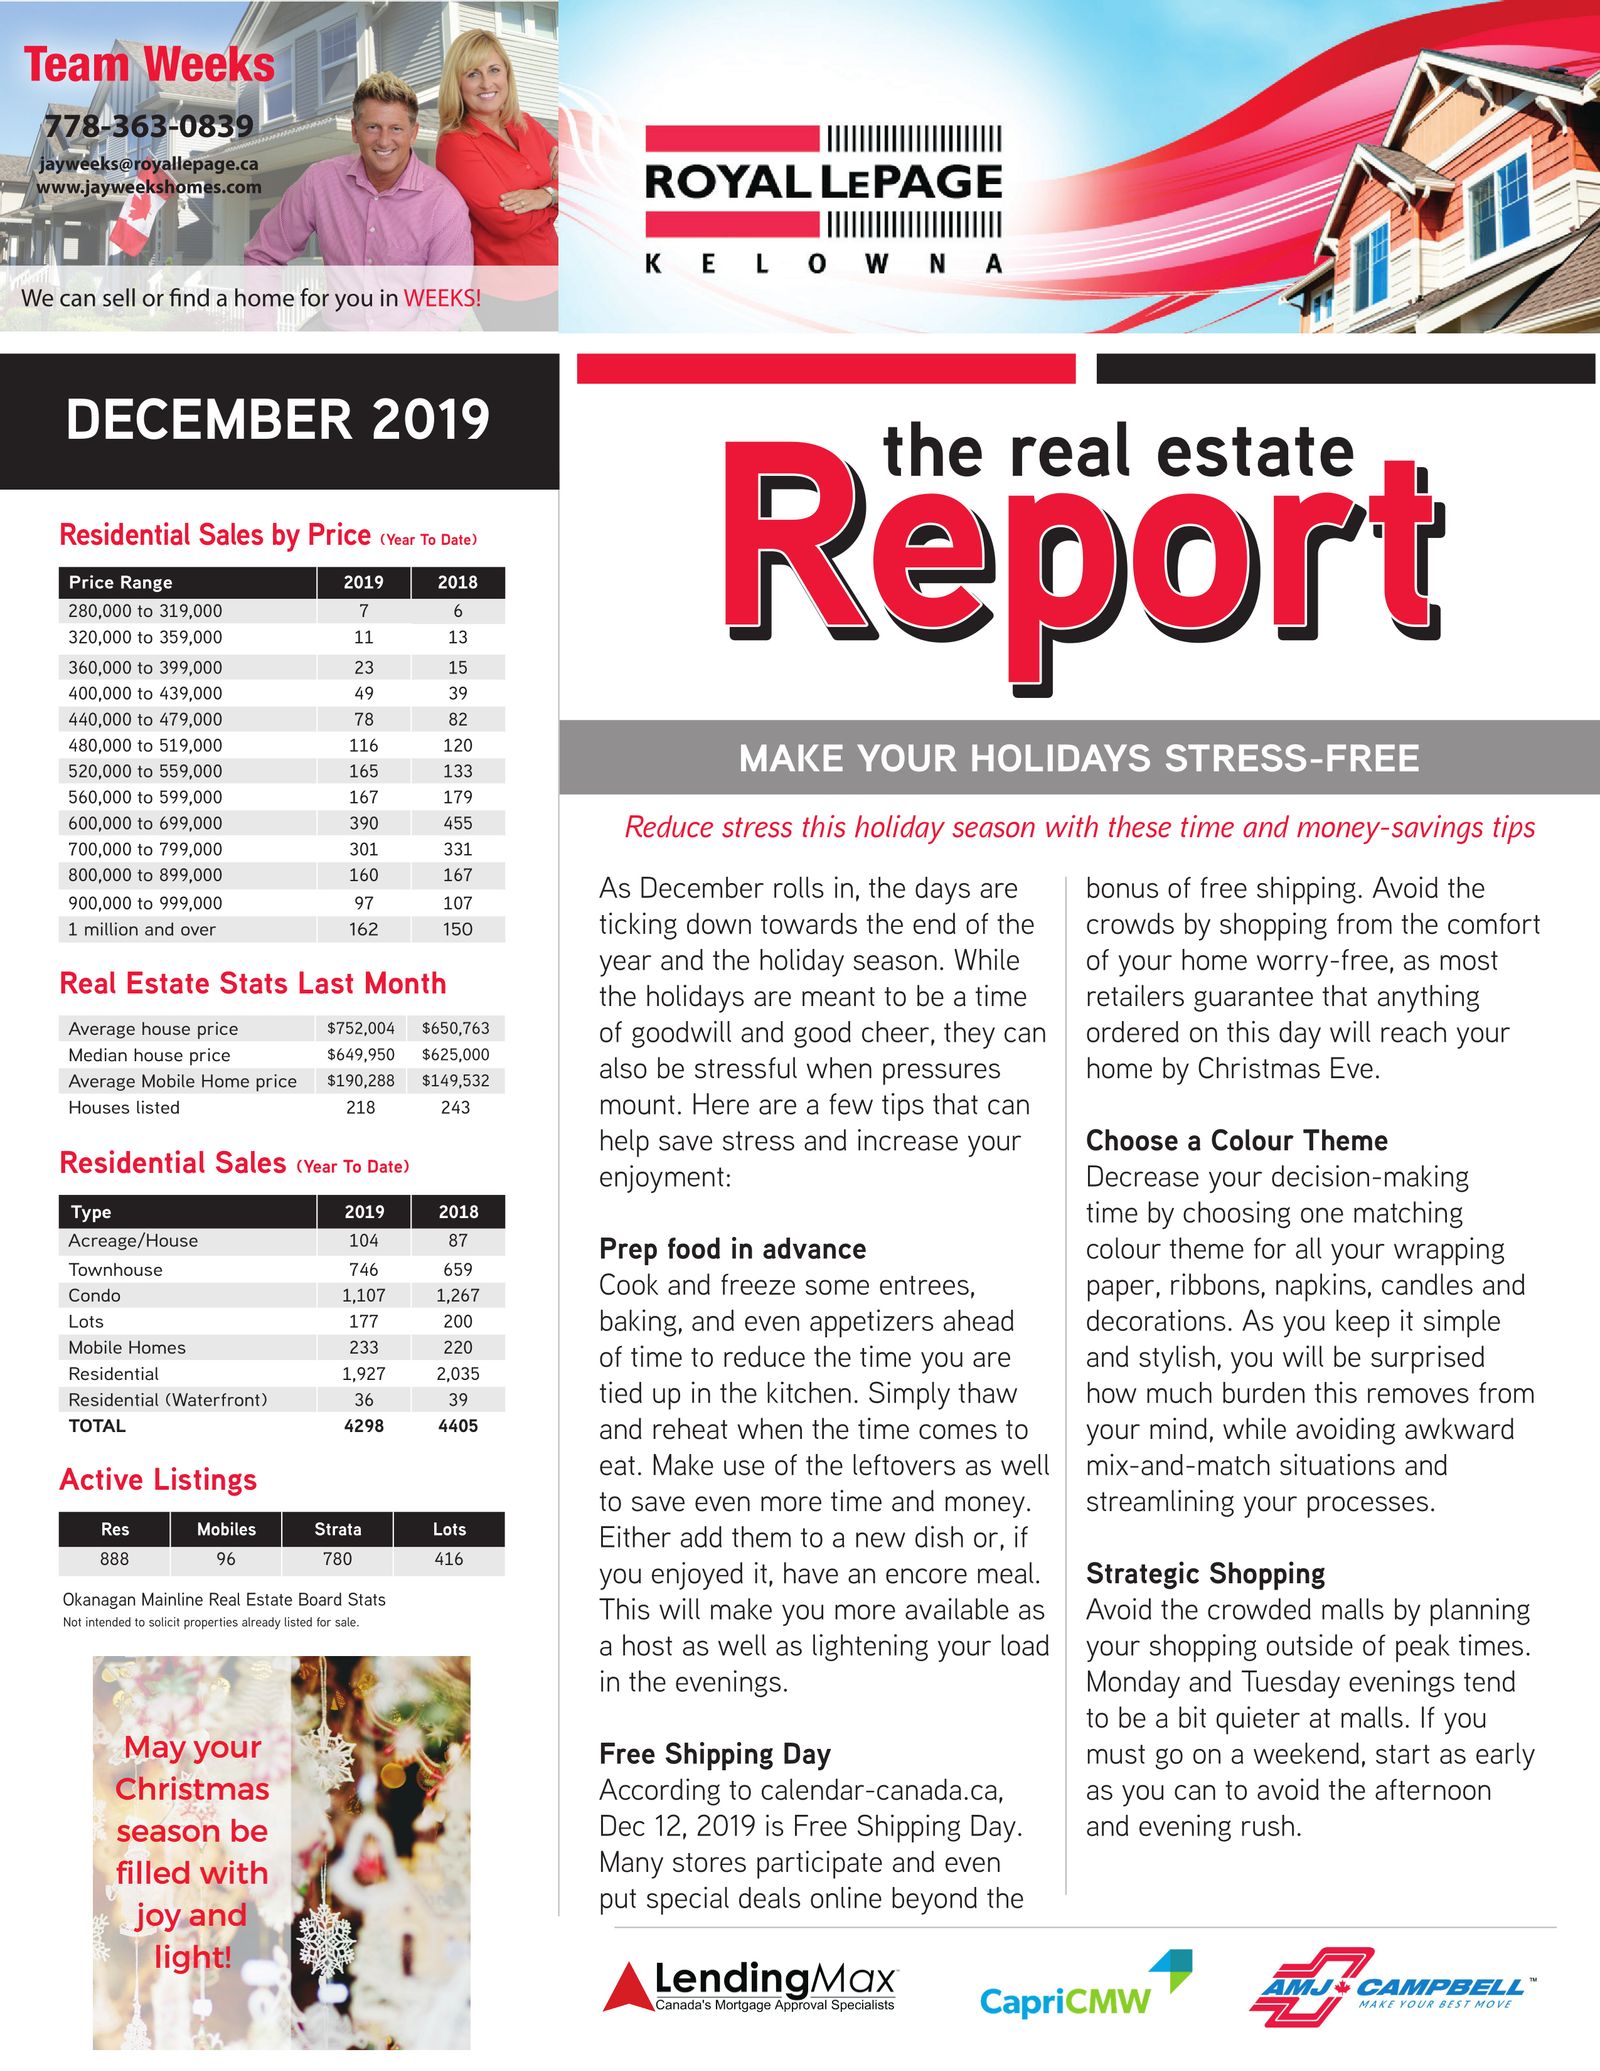 December Newsletter - Reduce your holiday stress with these few tips!